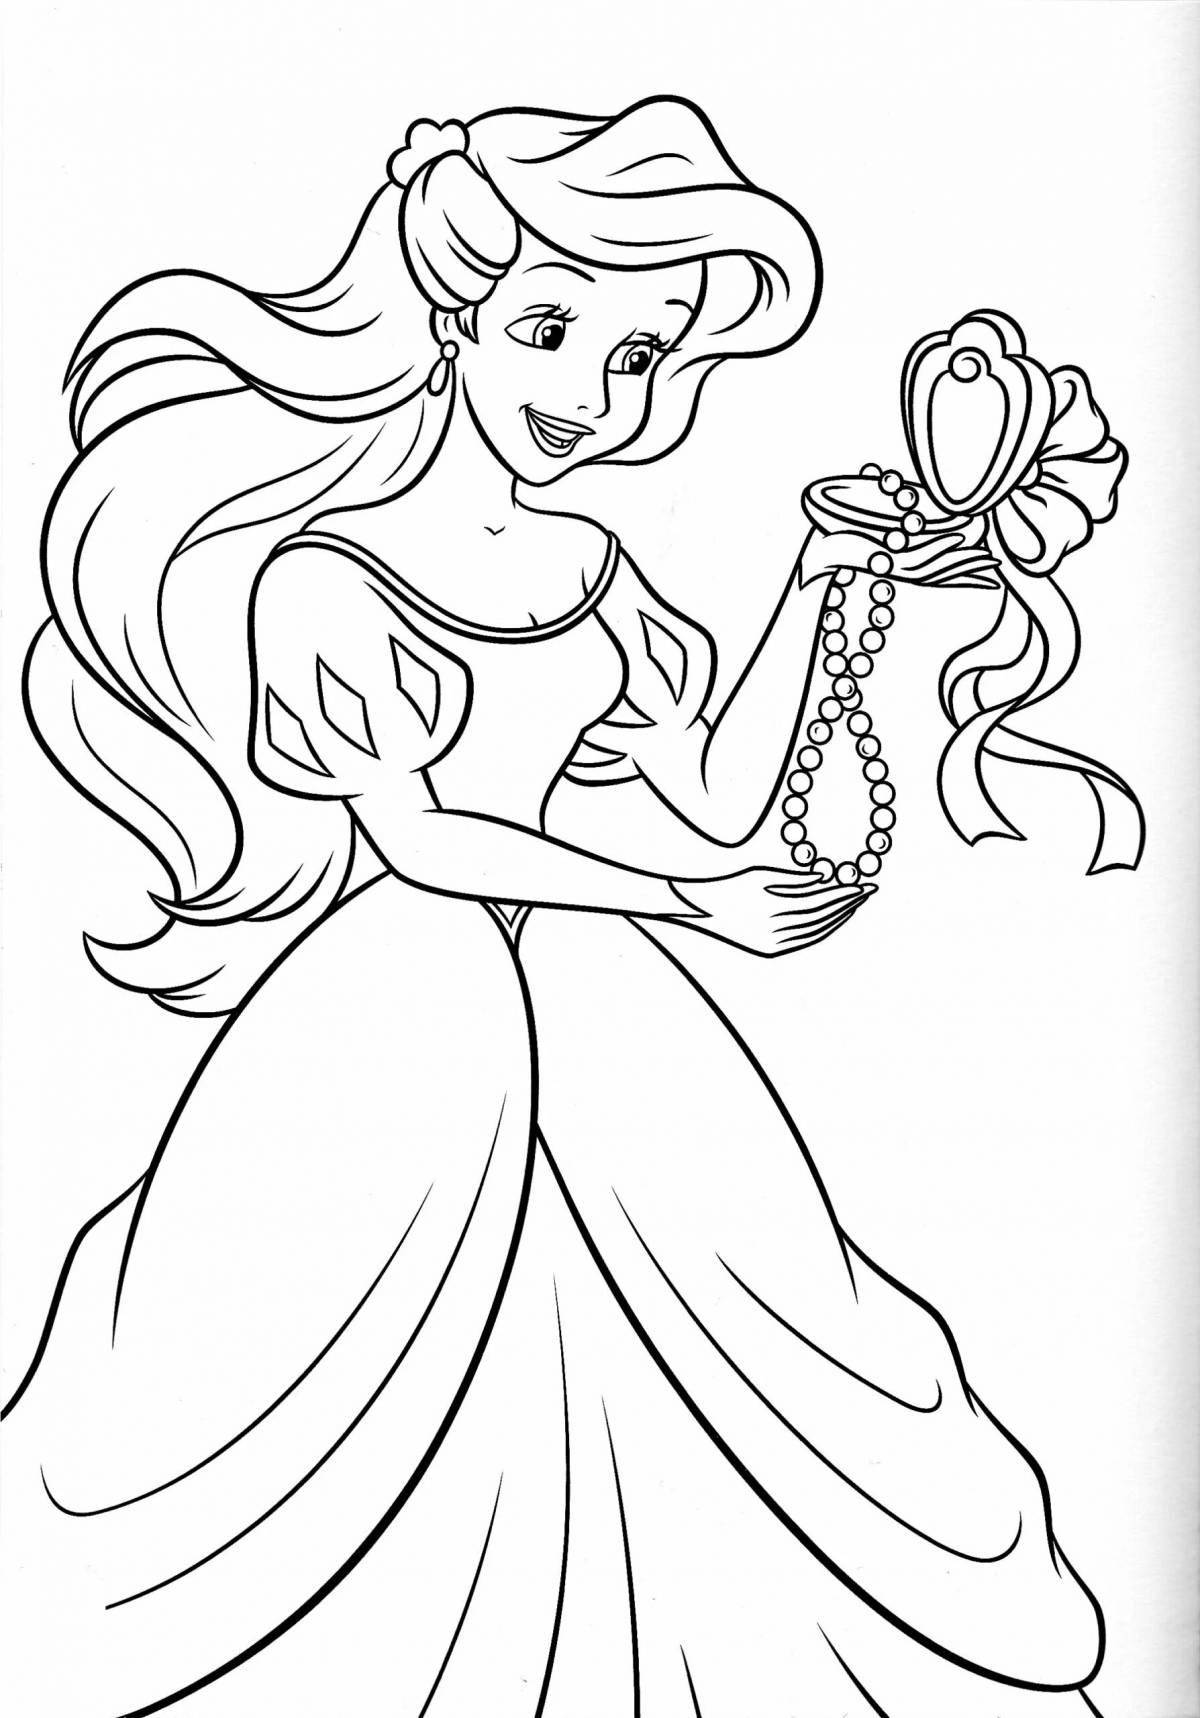 Fun coloring princesses for girls 6 years old